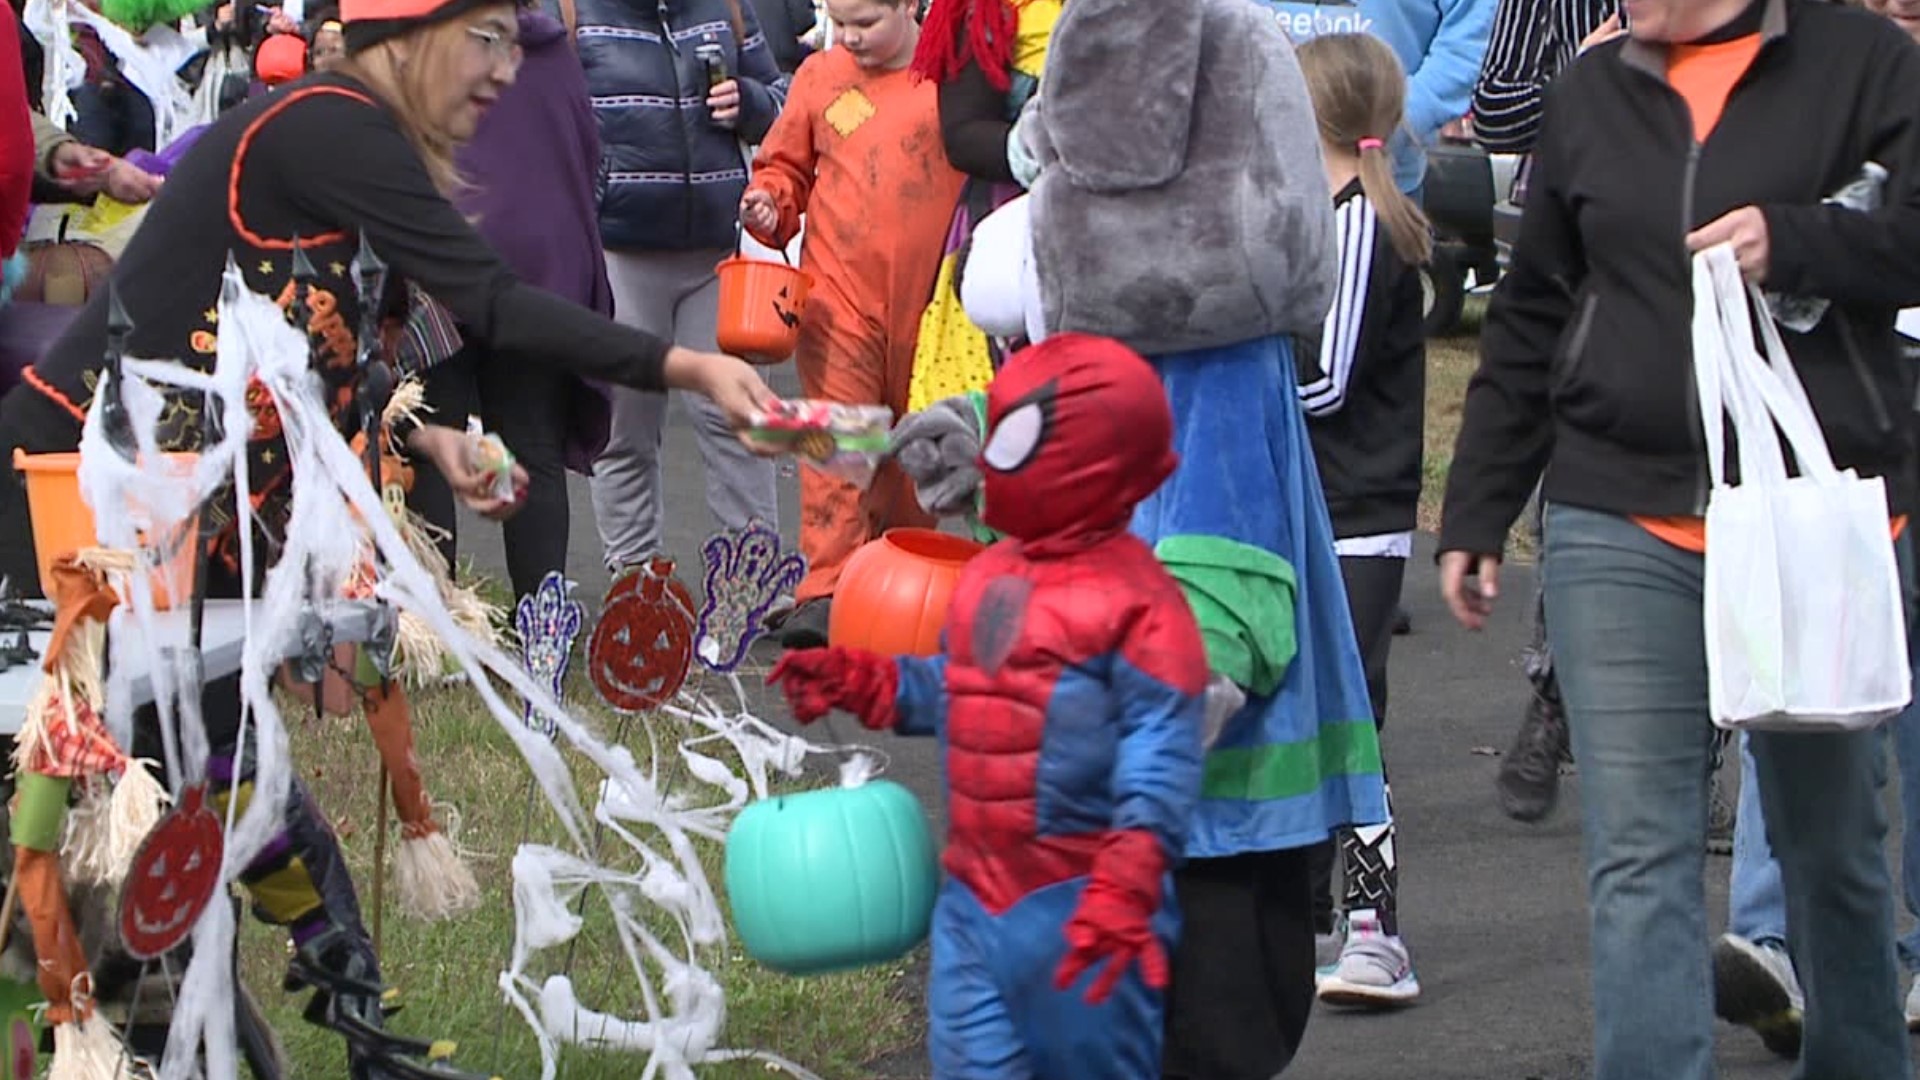 Organizers say they wanted to create a safe space for kids to get candy for the holiday.